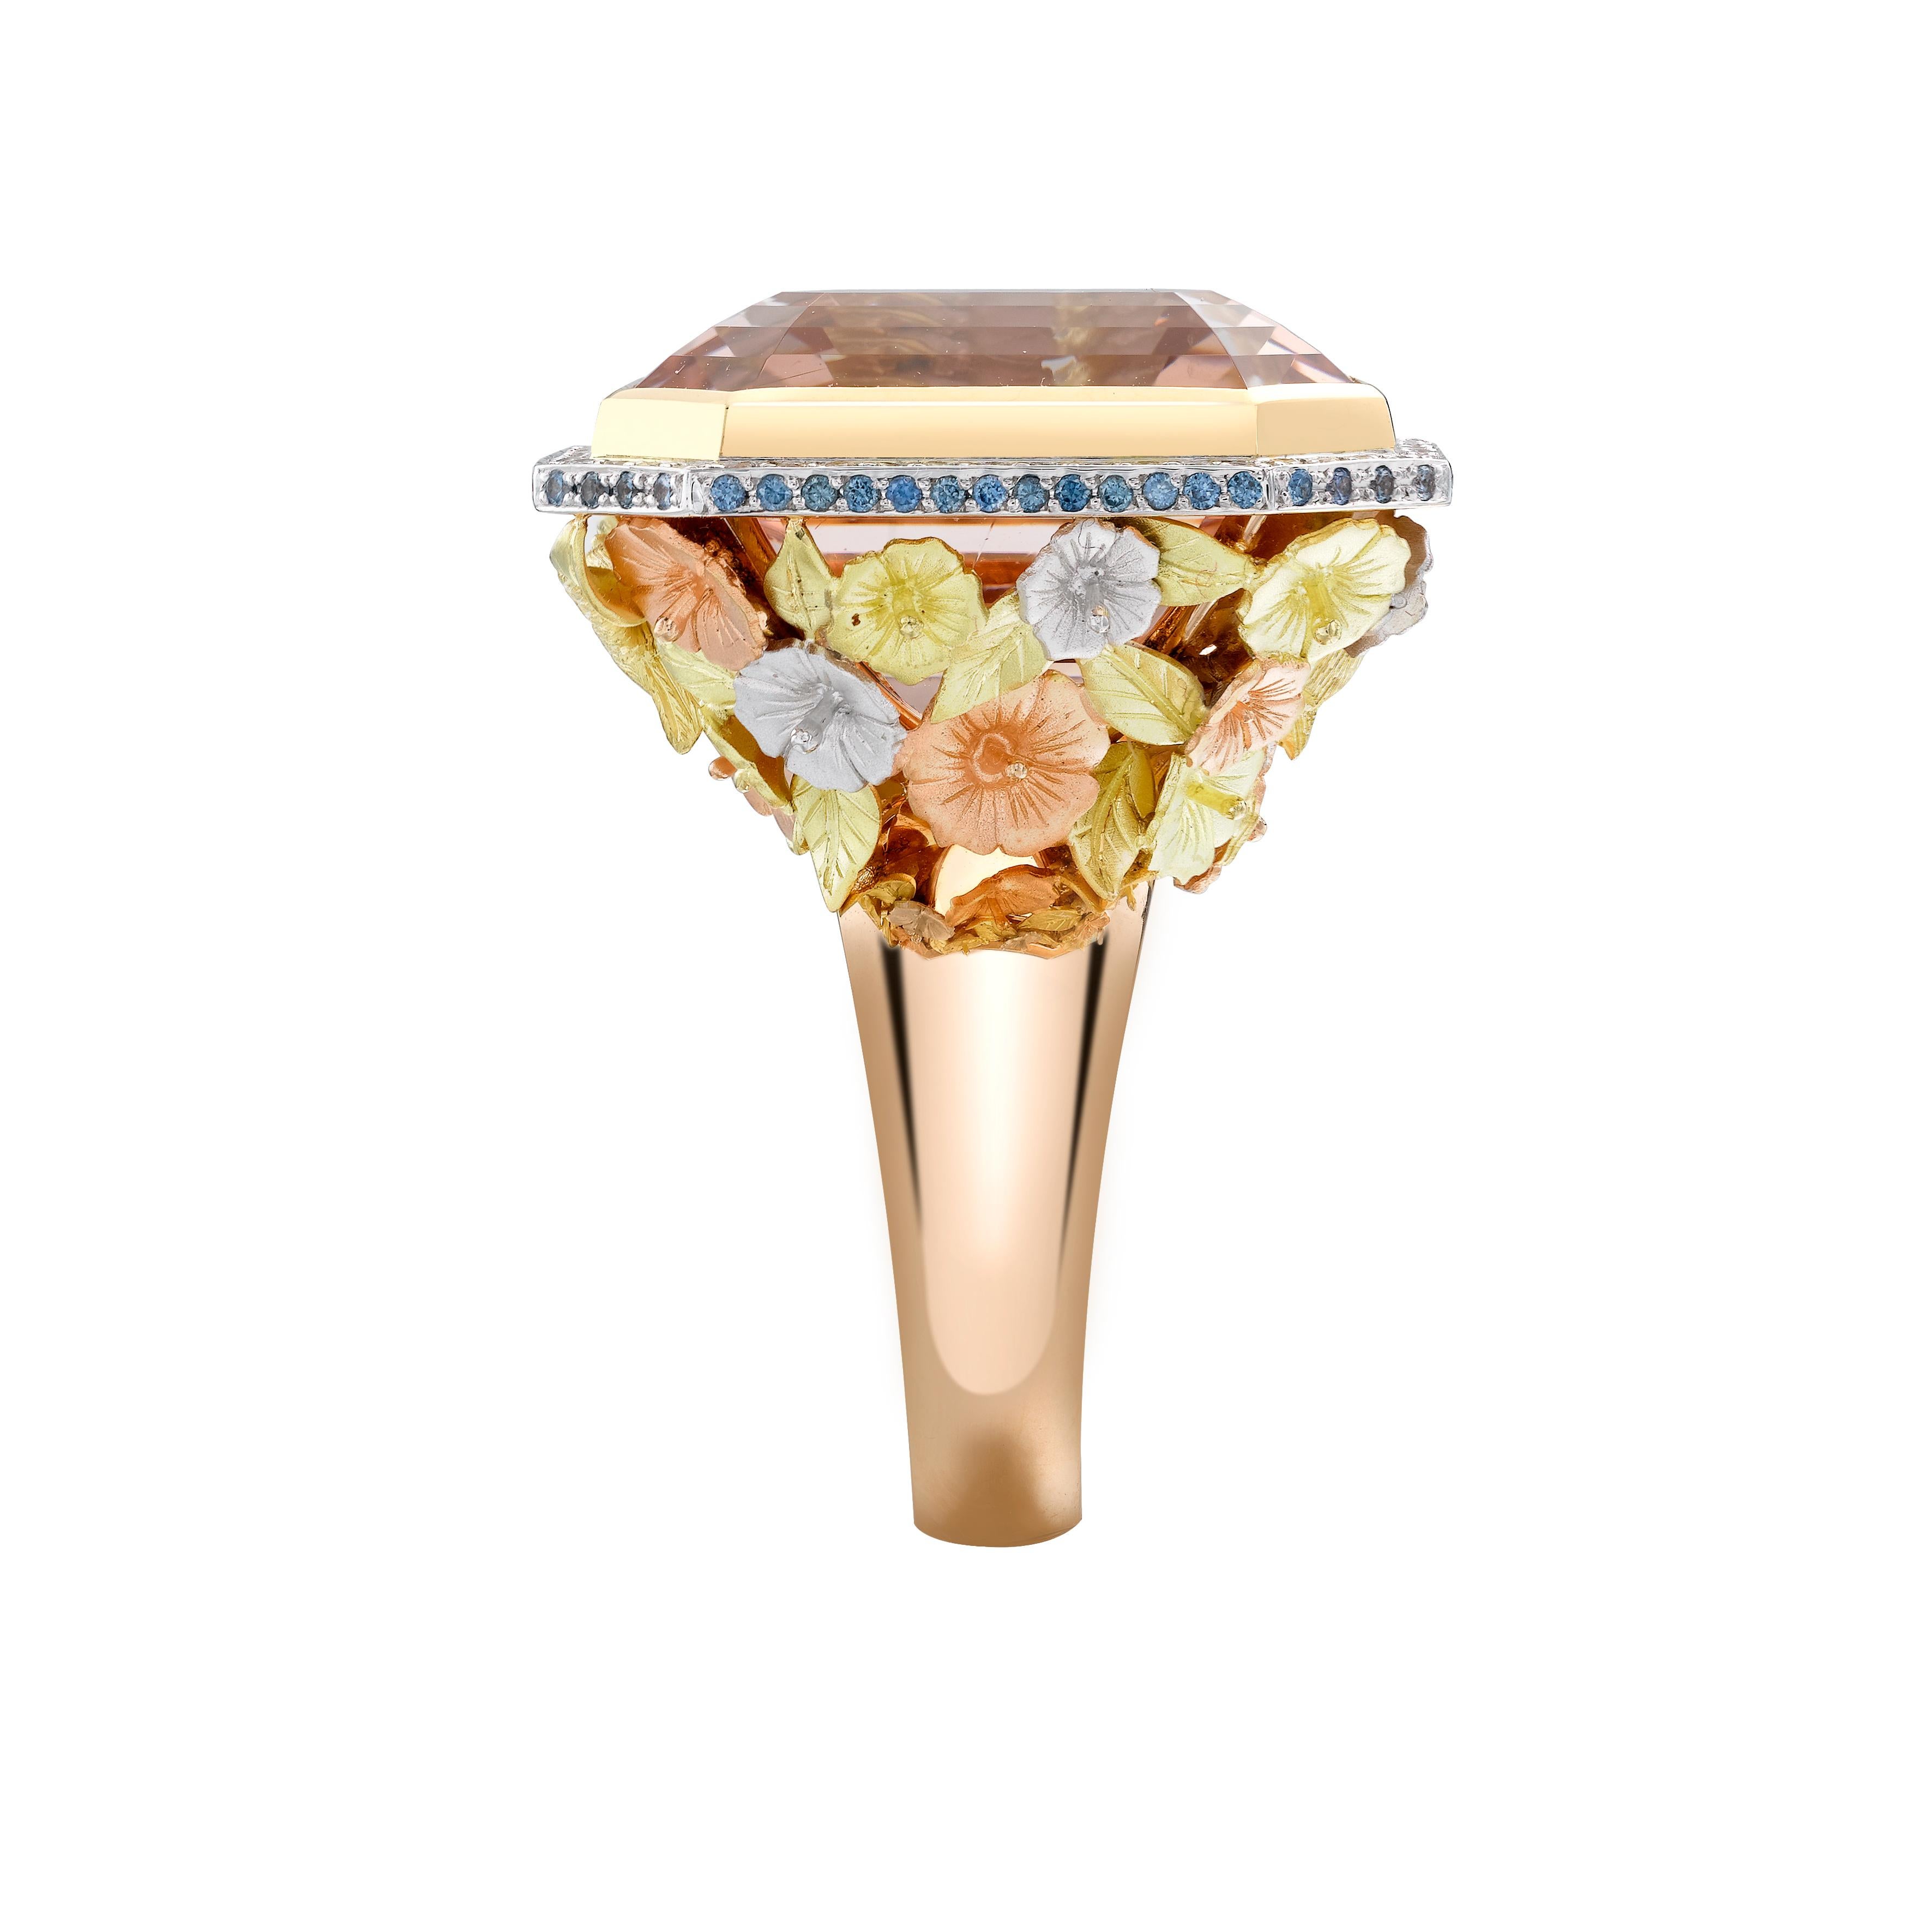 Theo Fennell's Hummingbird and Blossom ring is a beautiful example of the perfect harmony between design and craftsmanship, elegant and thoughtful. The finely detailed yellow, white and rose gold hibiscus flowers climb around the 46.99ct Morganite